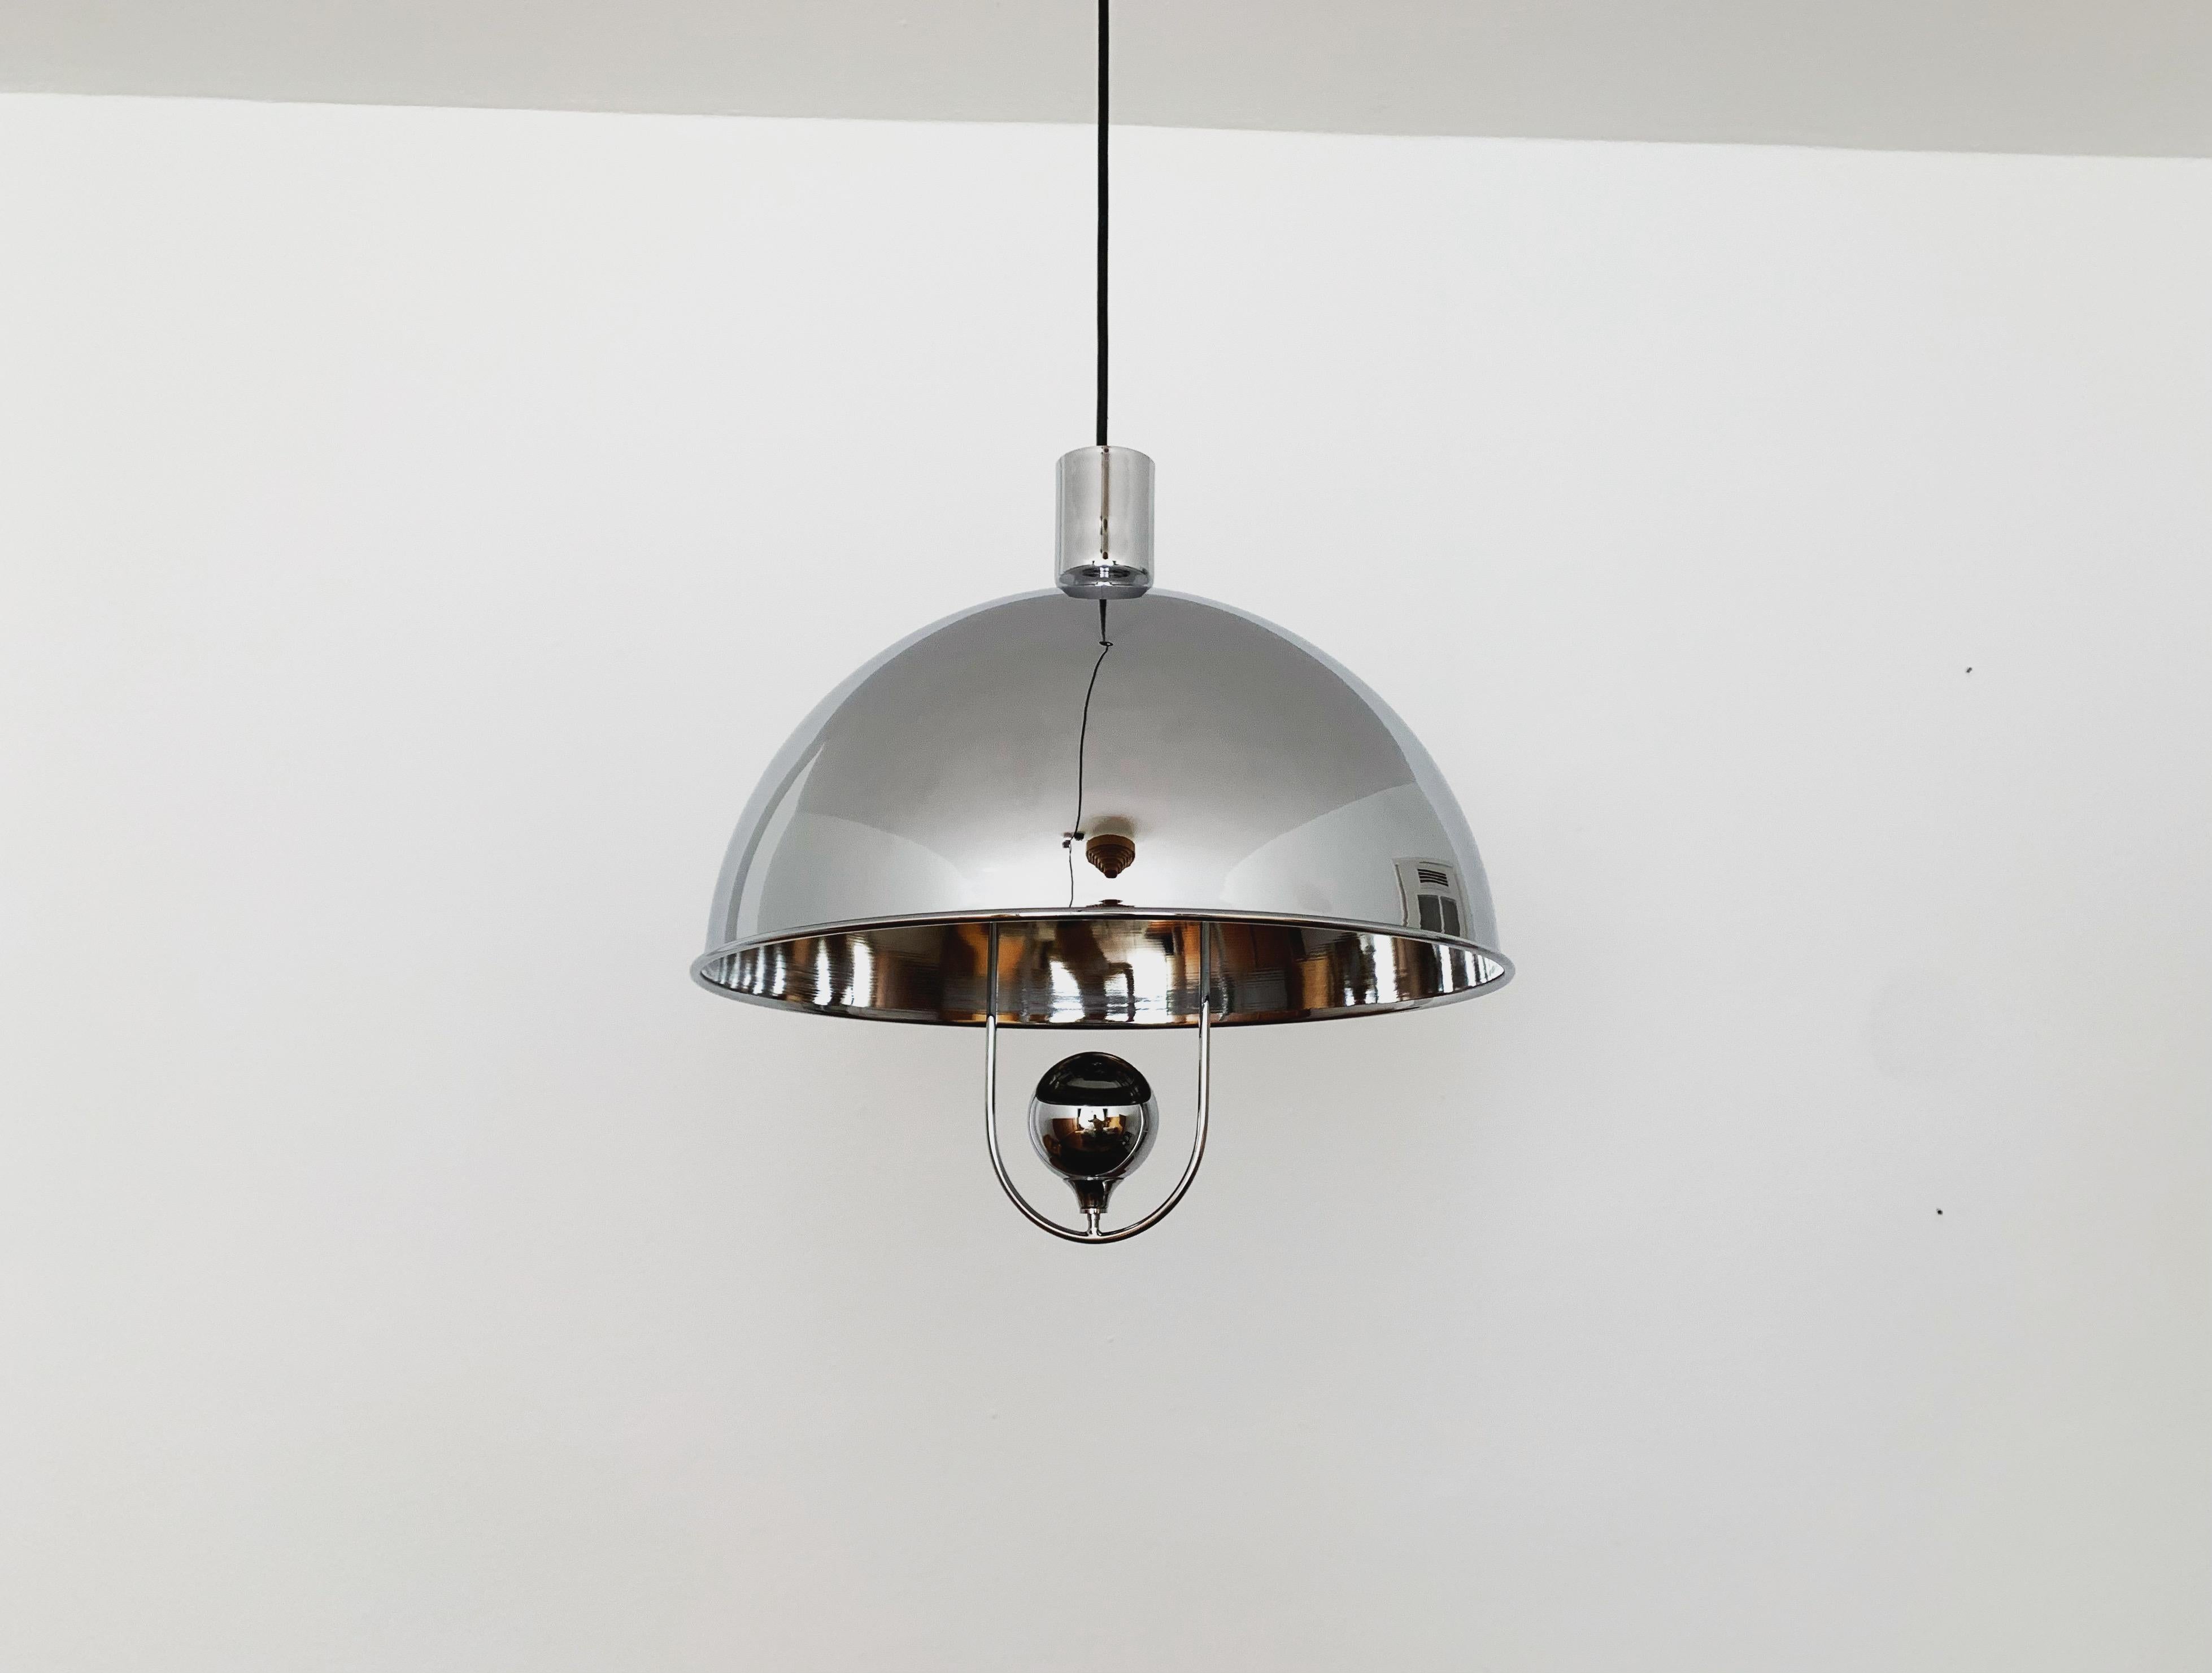 Very nice pendant lamp from the 1960s.
The lighting effect of the lamp is extremely beautiful.
The design creates a very elegant and pleasant light.
The lamp creates a very cozy atmosphere and is of very high quality.

Design: Florian